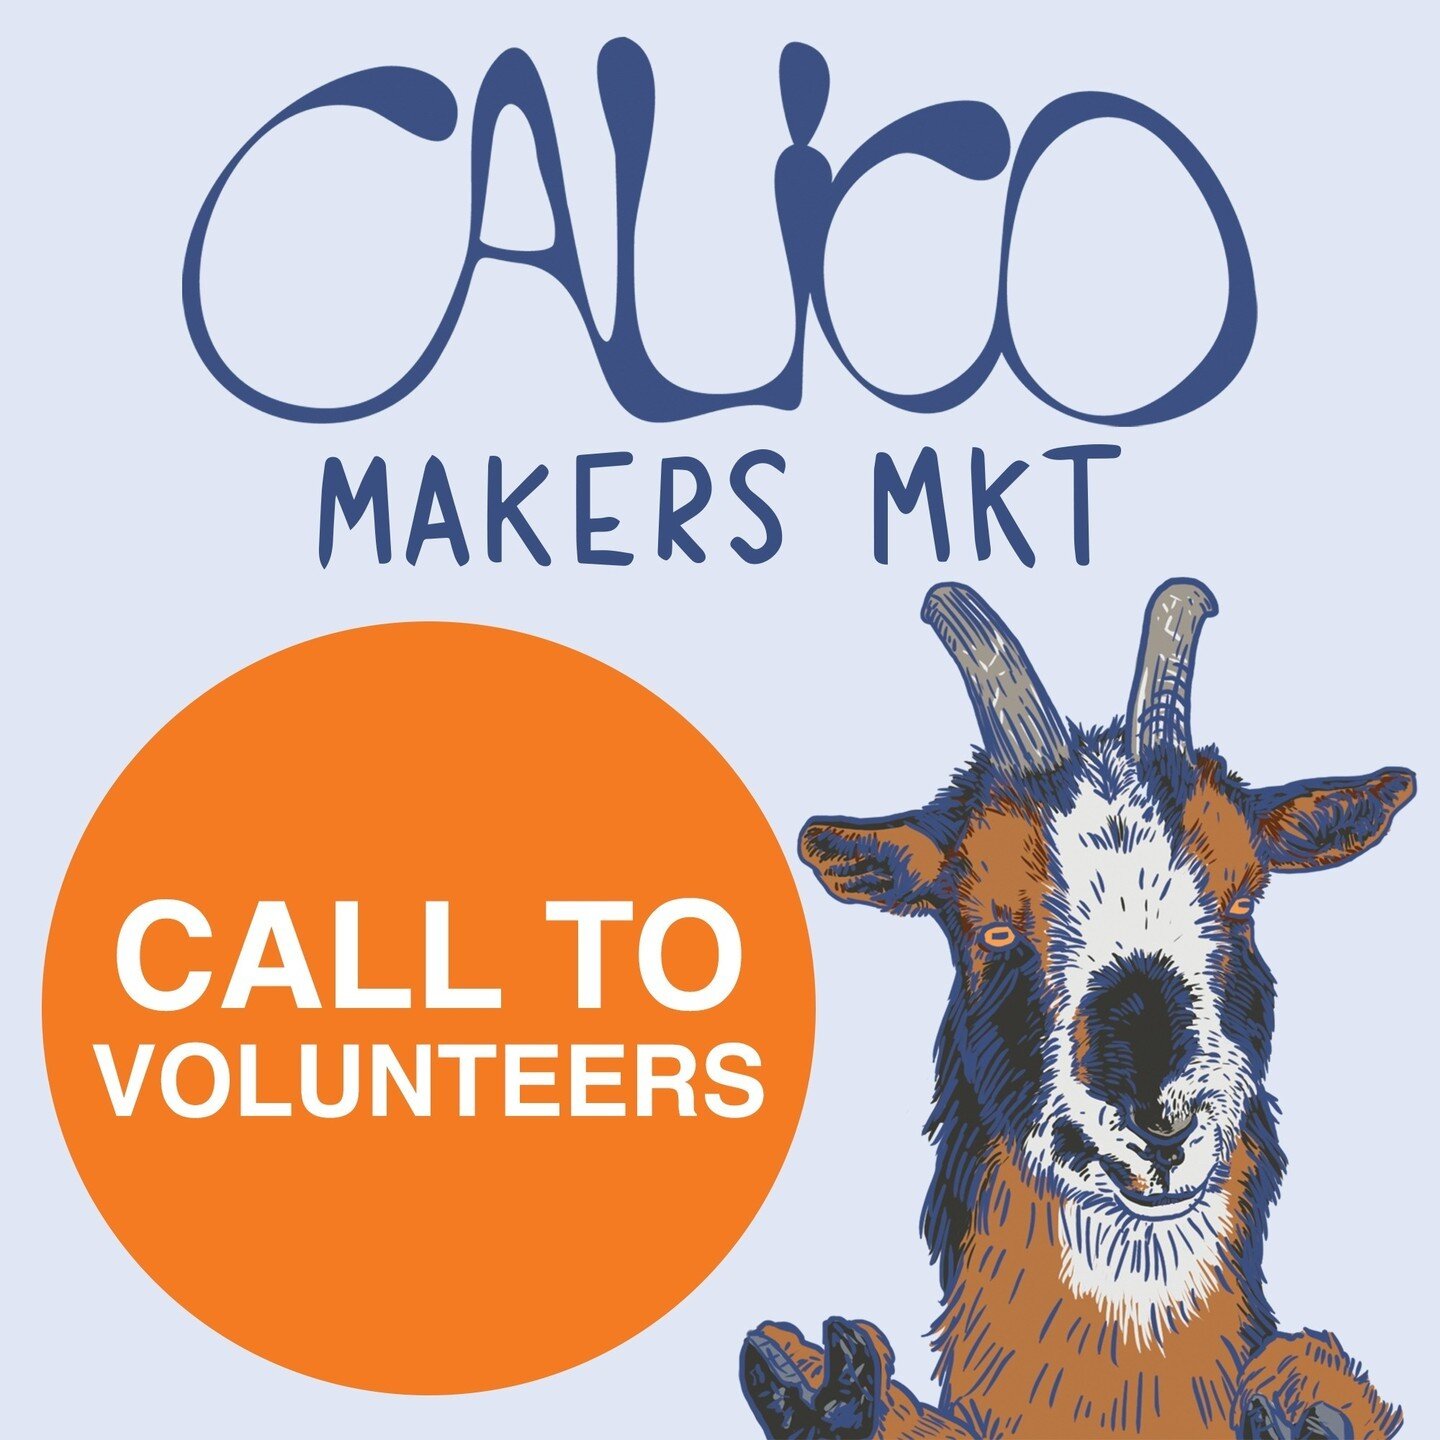 We are in need of volunteers for this spring's Makers Market! Here&rsquo;s a quick rundown of our volunteer needs:⁠
⁠
Gateway: 2-4 for the front and back gate each day. Responsibilities are to welcome visitors, let them know it&rsquo;s a one way flow